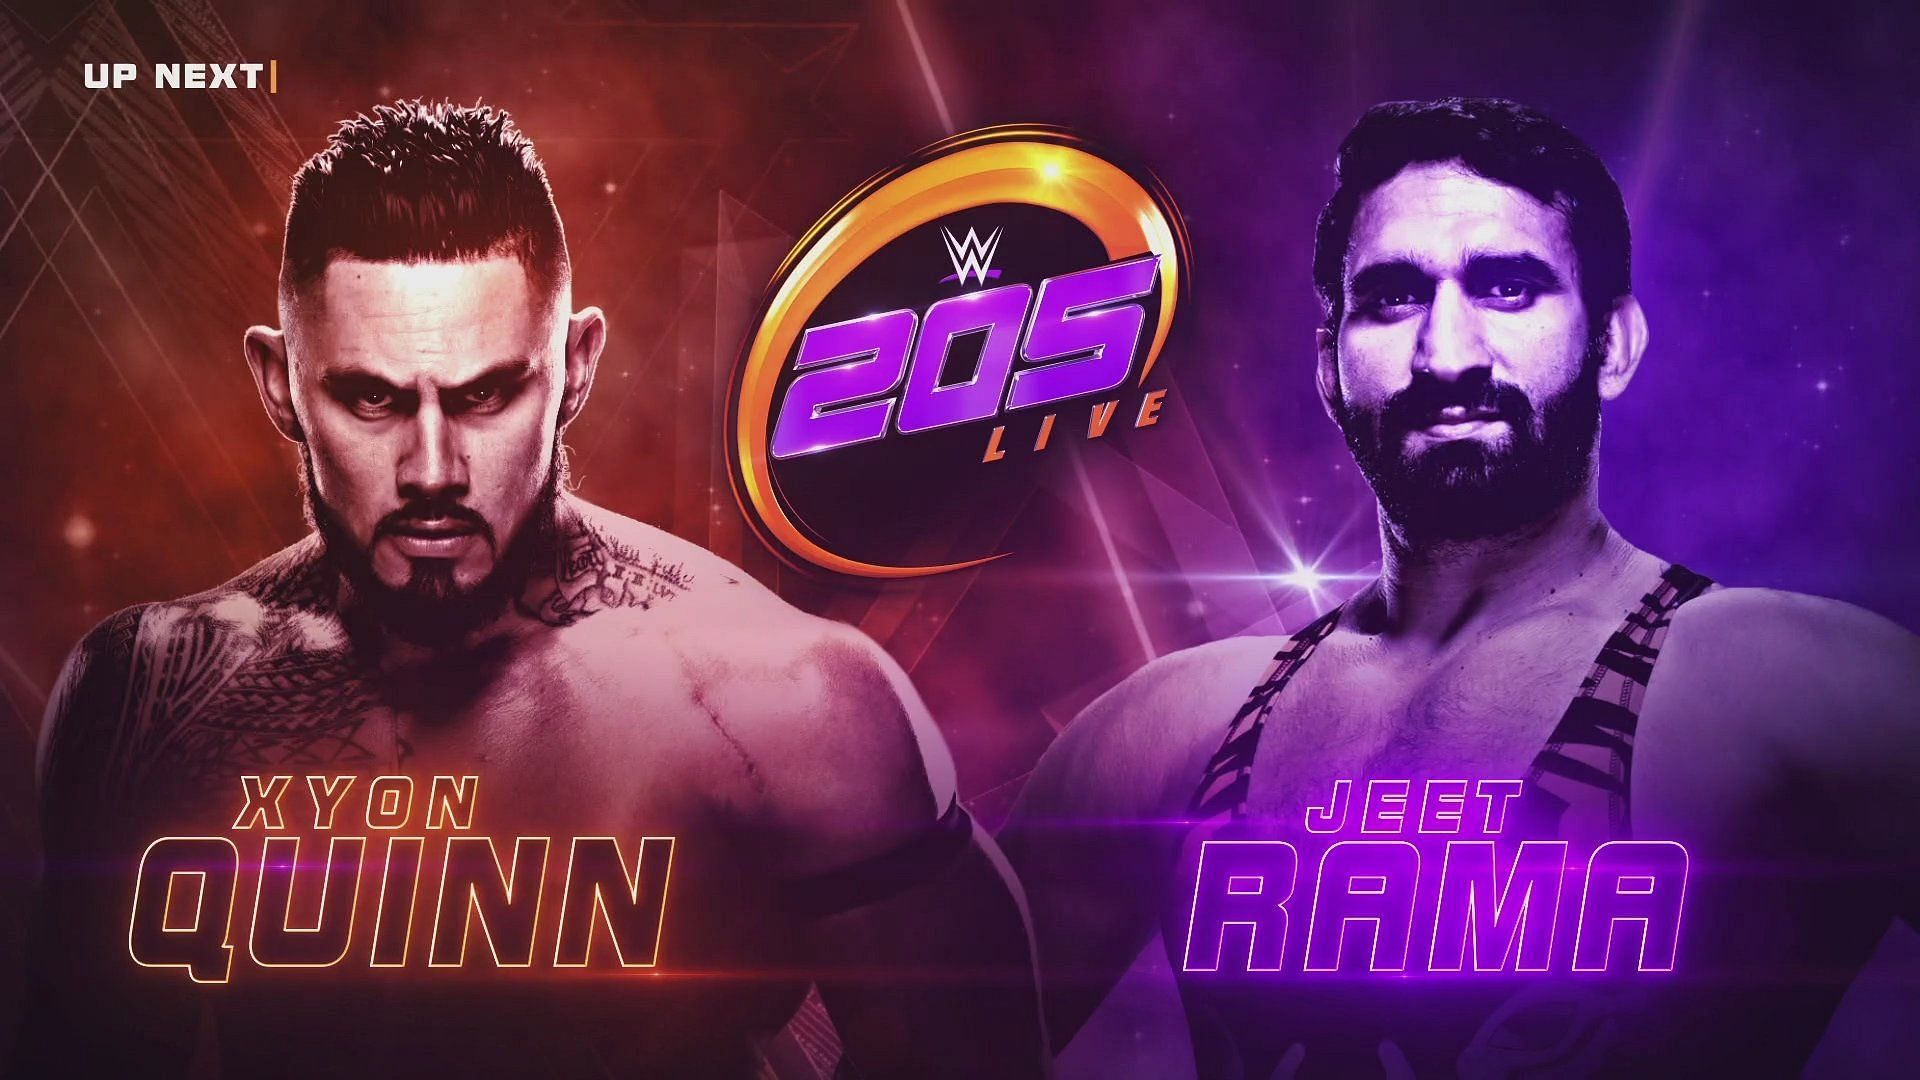 205 Live had a back and forth main event between Xyon Quinn and Jeet Rama